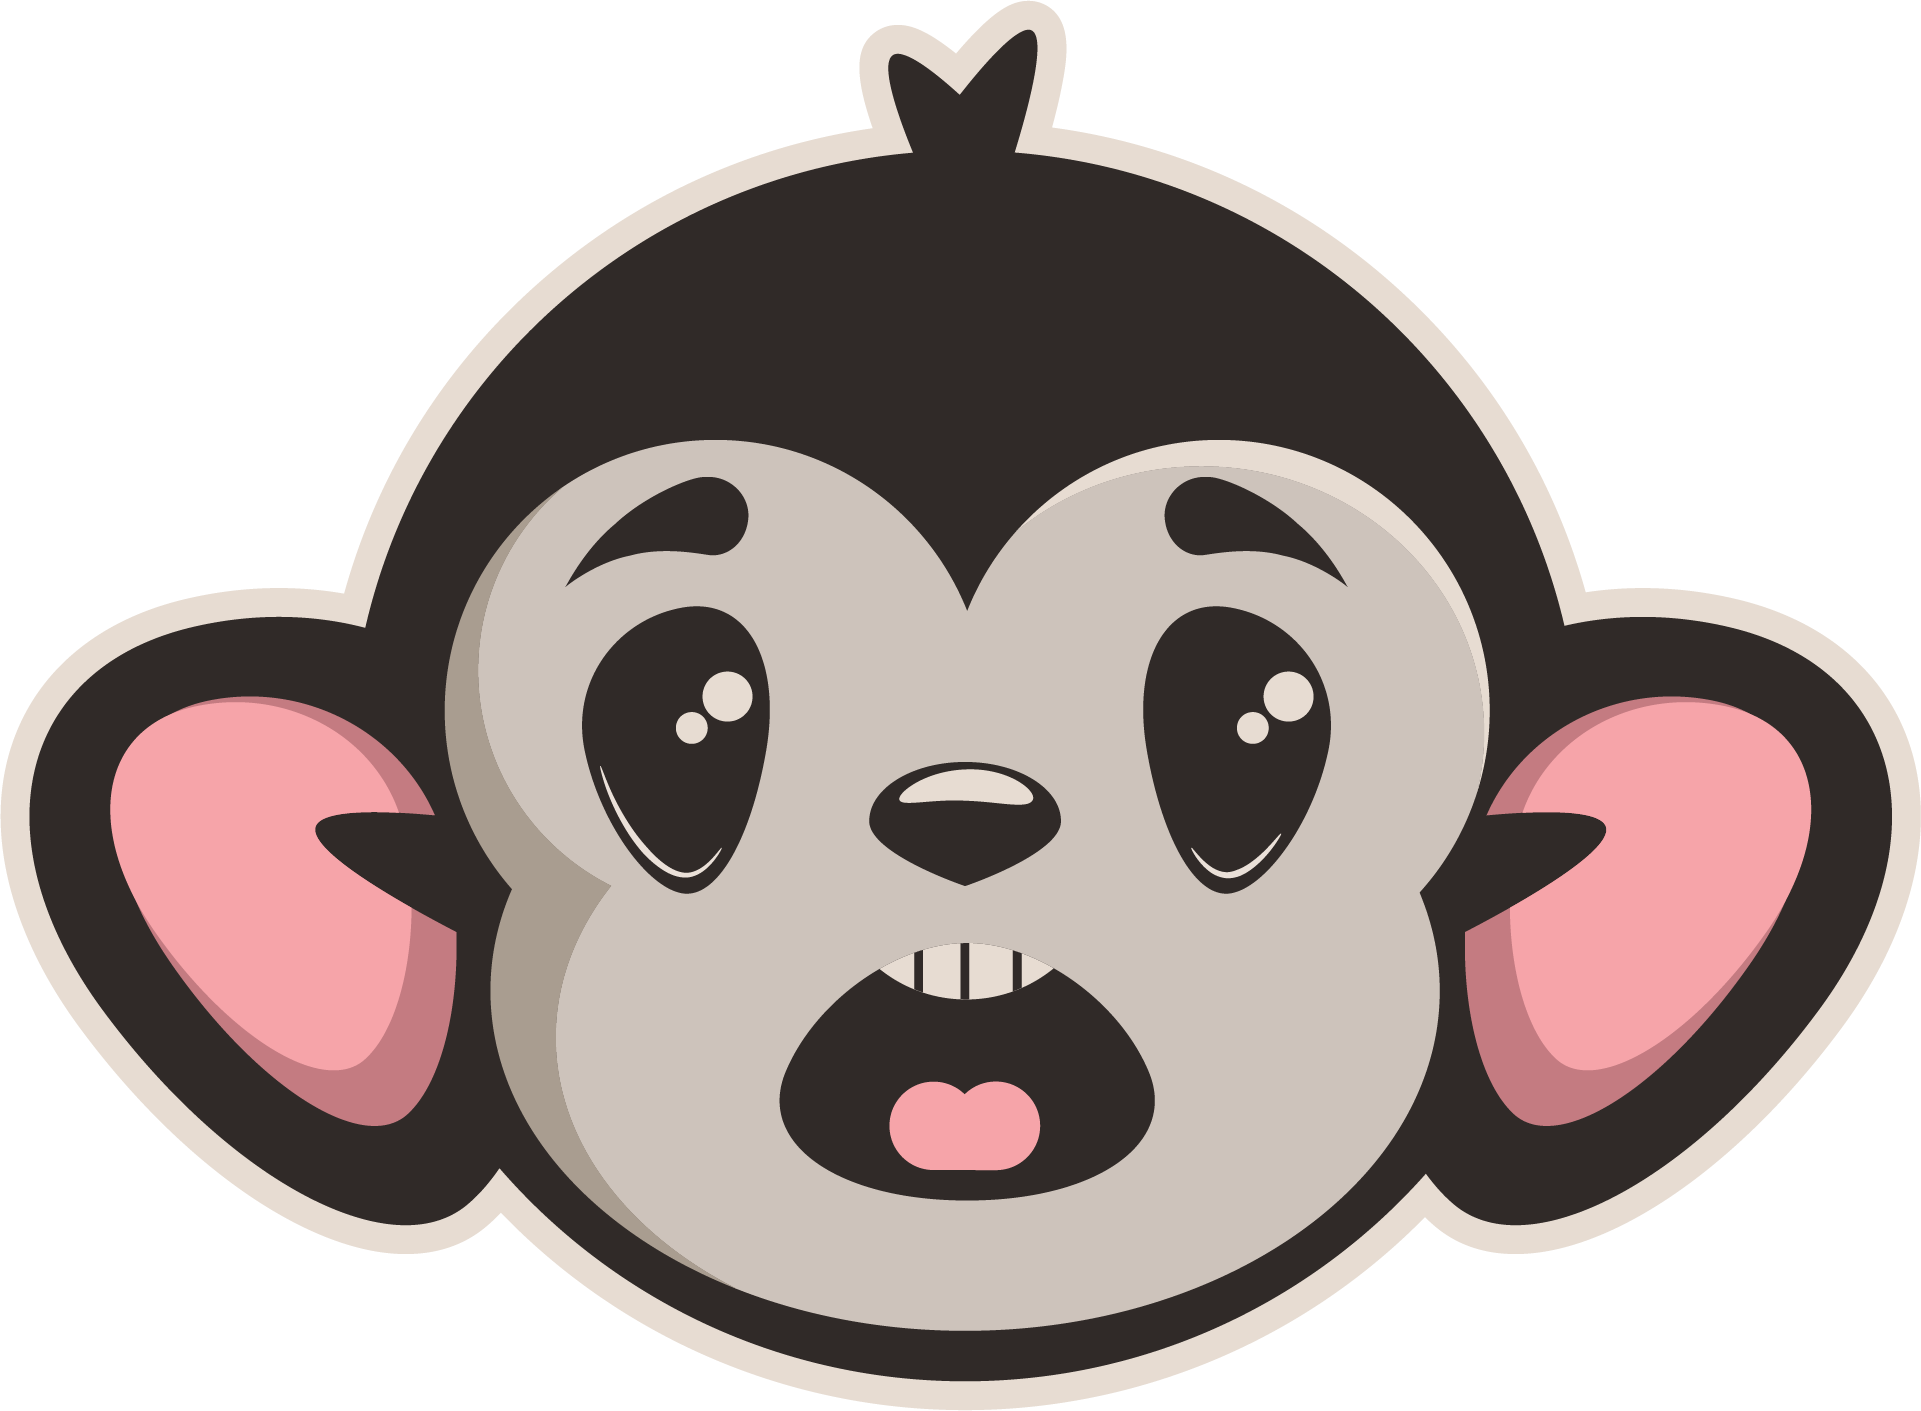 Download 1921 X 1411 5 Monkey Adobe Illustrator Png Image With No Background Pngkey Com